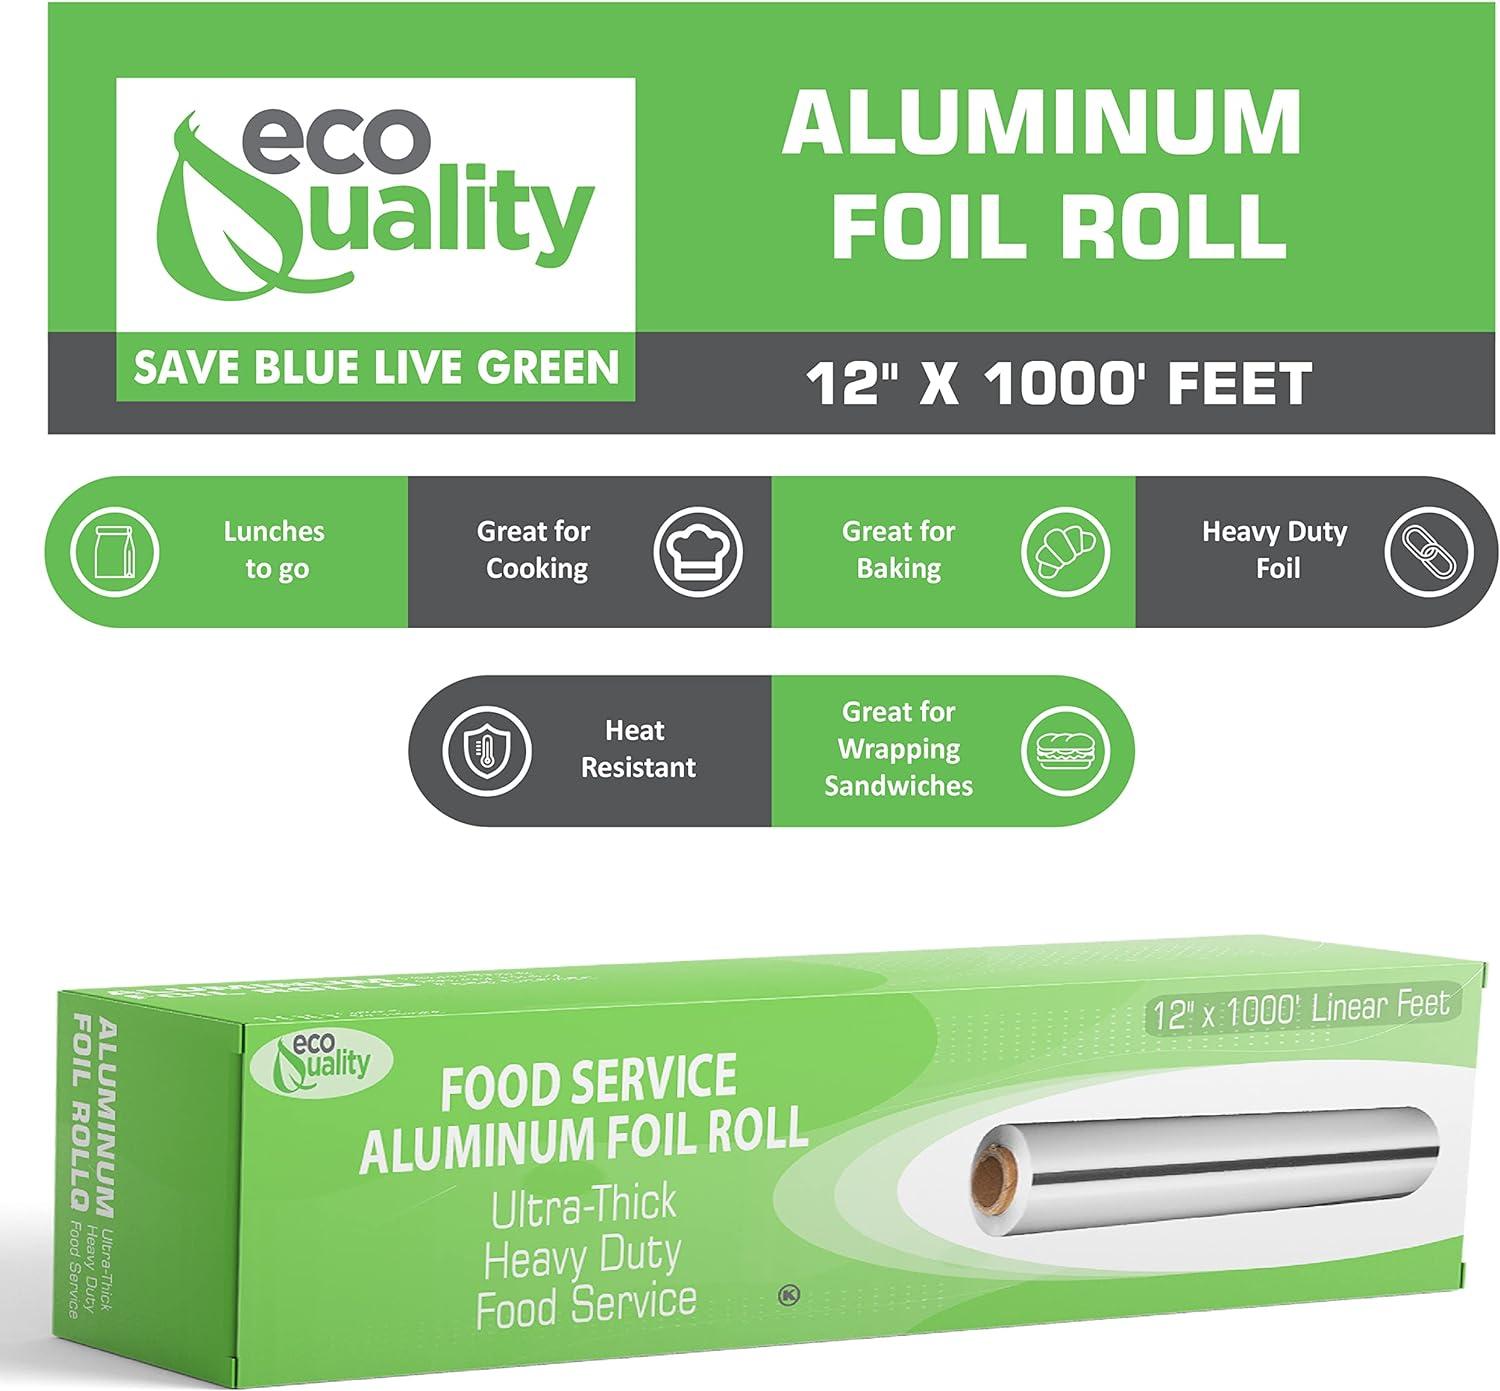 How Thick is Aluminum Foil and Where is Used Aaluminum